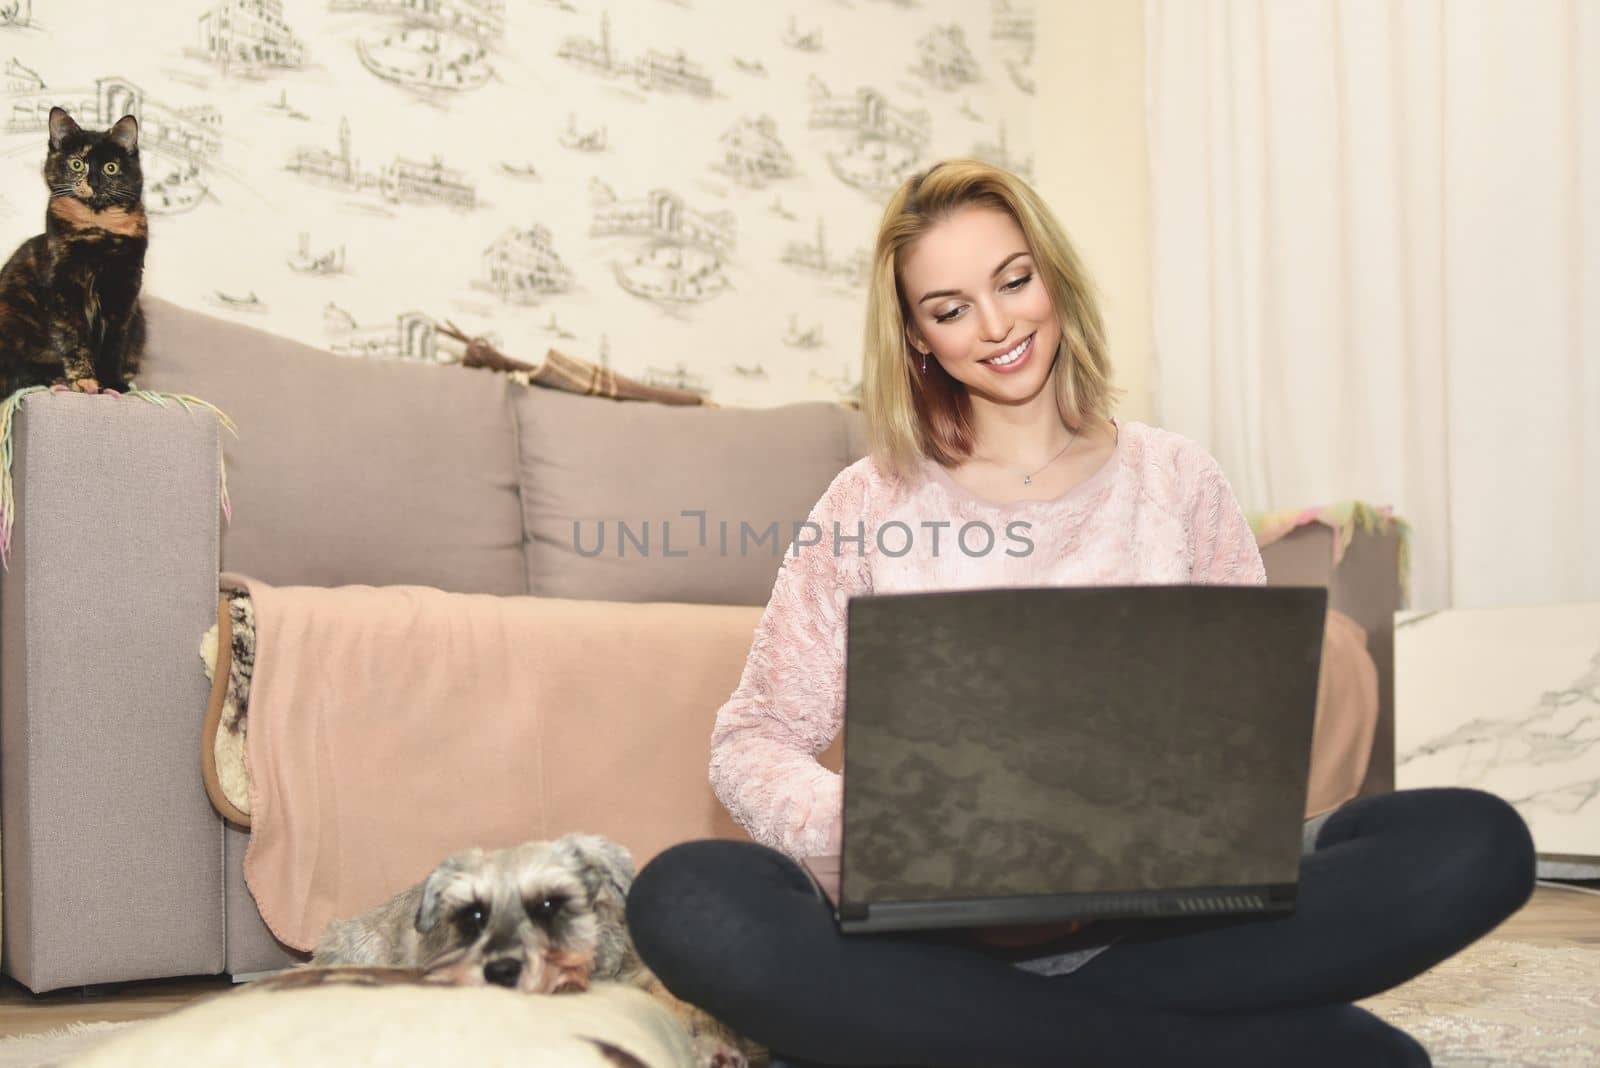 woman smiles during a video call on a laptop, little cat sitting on the couch and cute dog is sleeping on a pillow nearby.